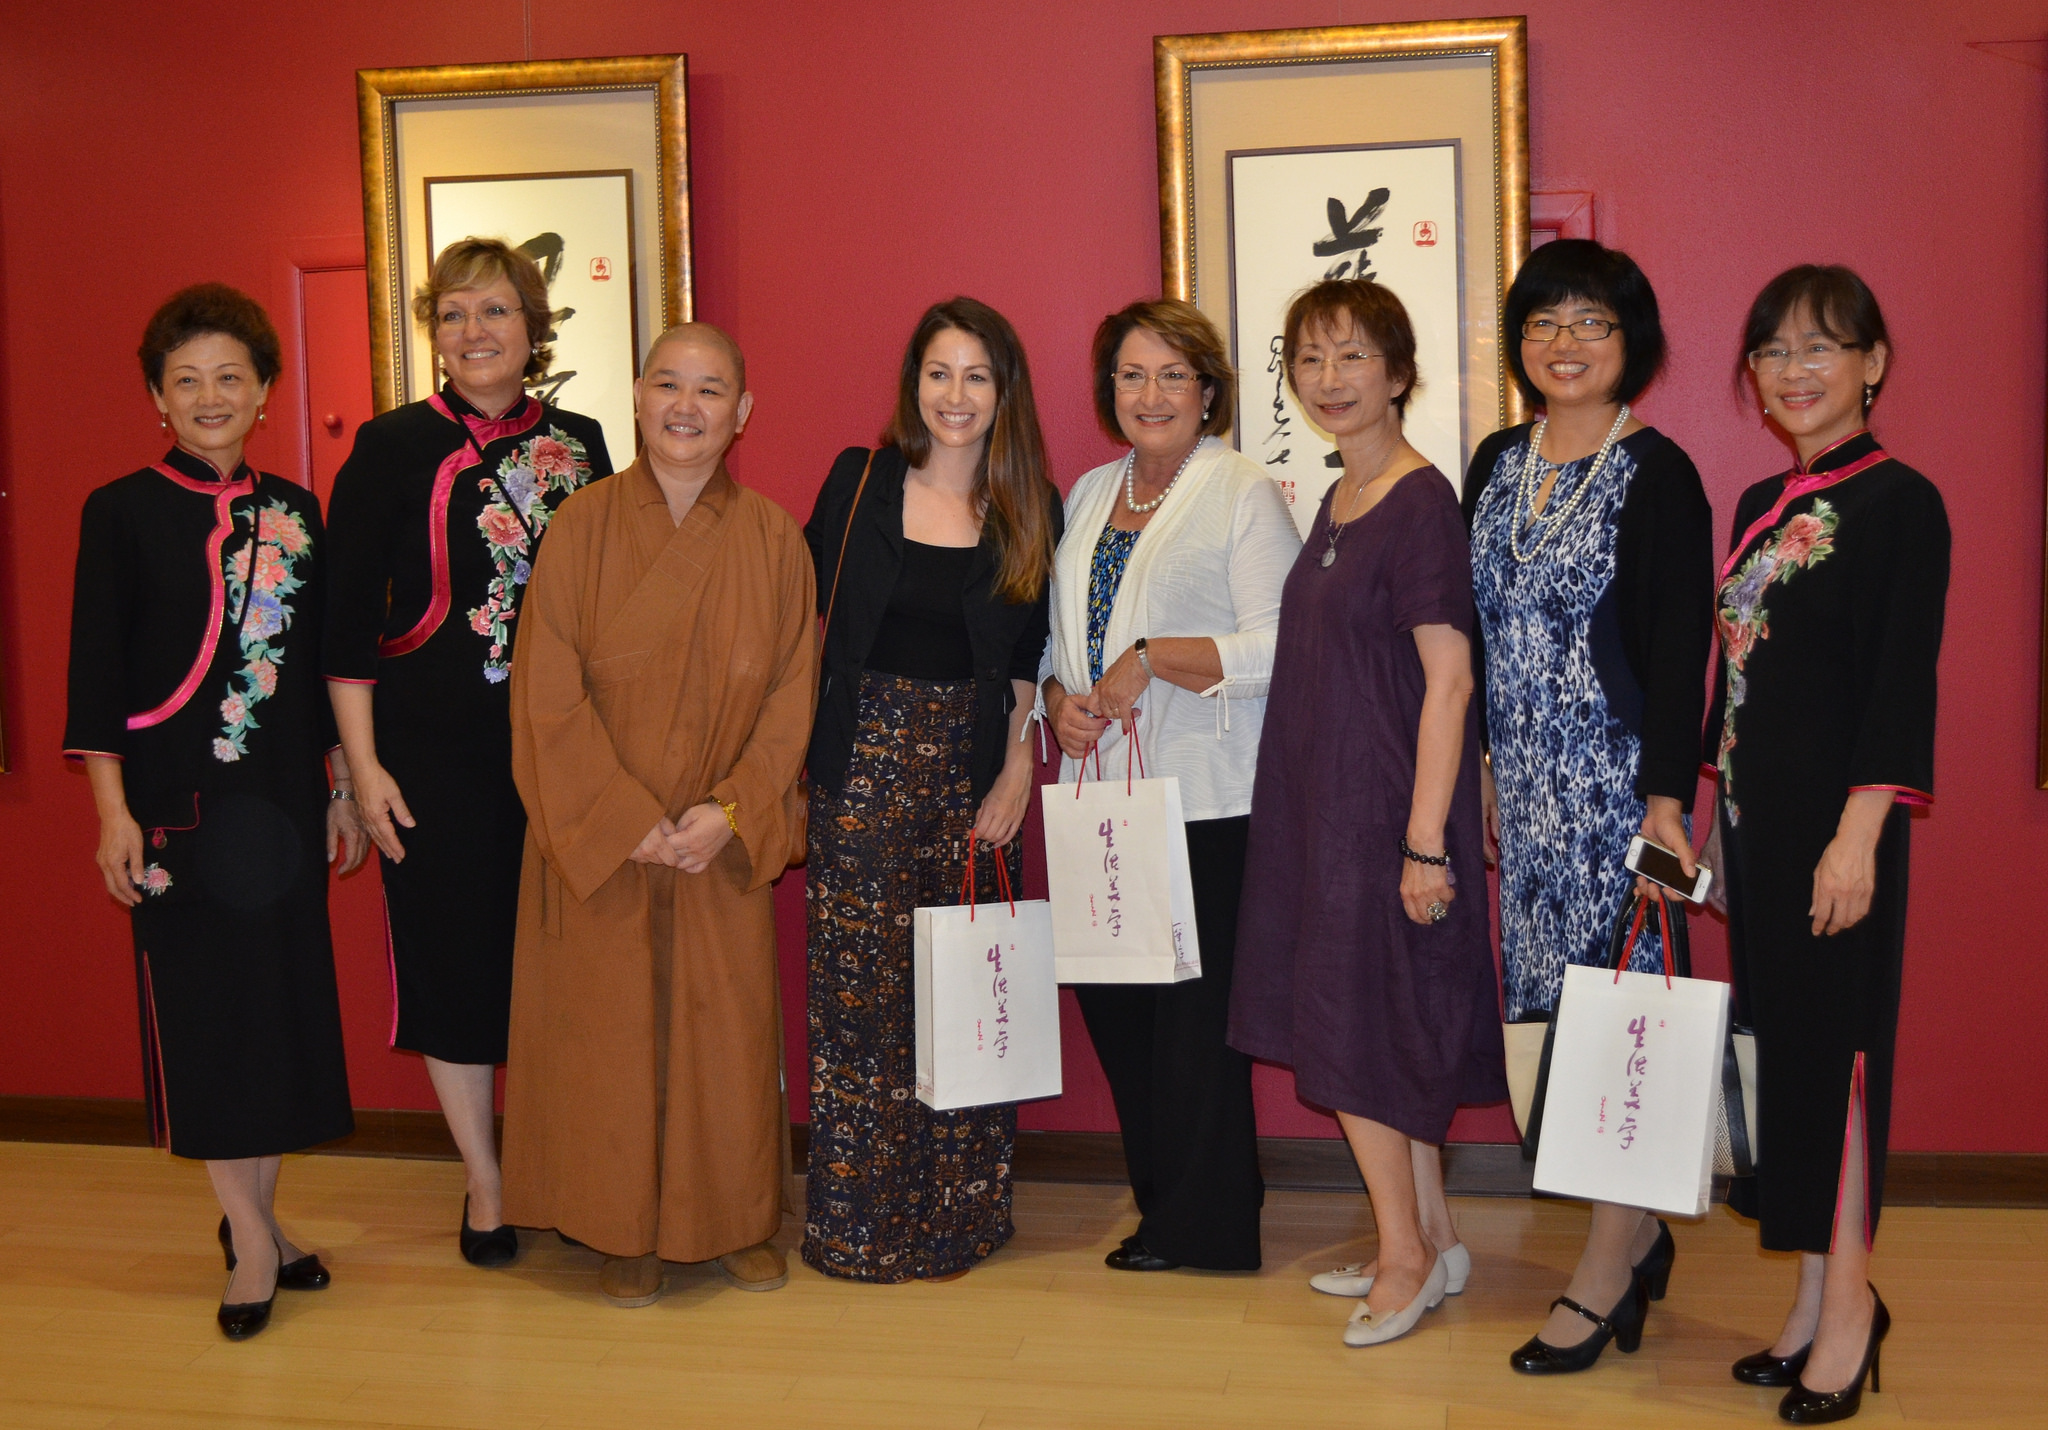 Mayor Jacobs with personnel celebrating Asian culture